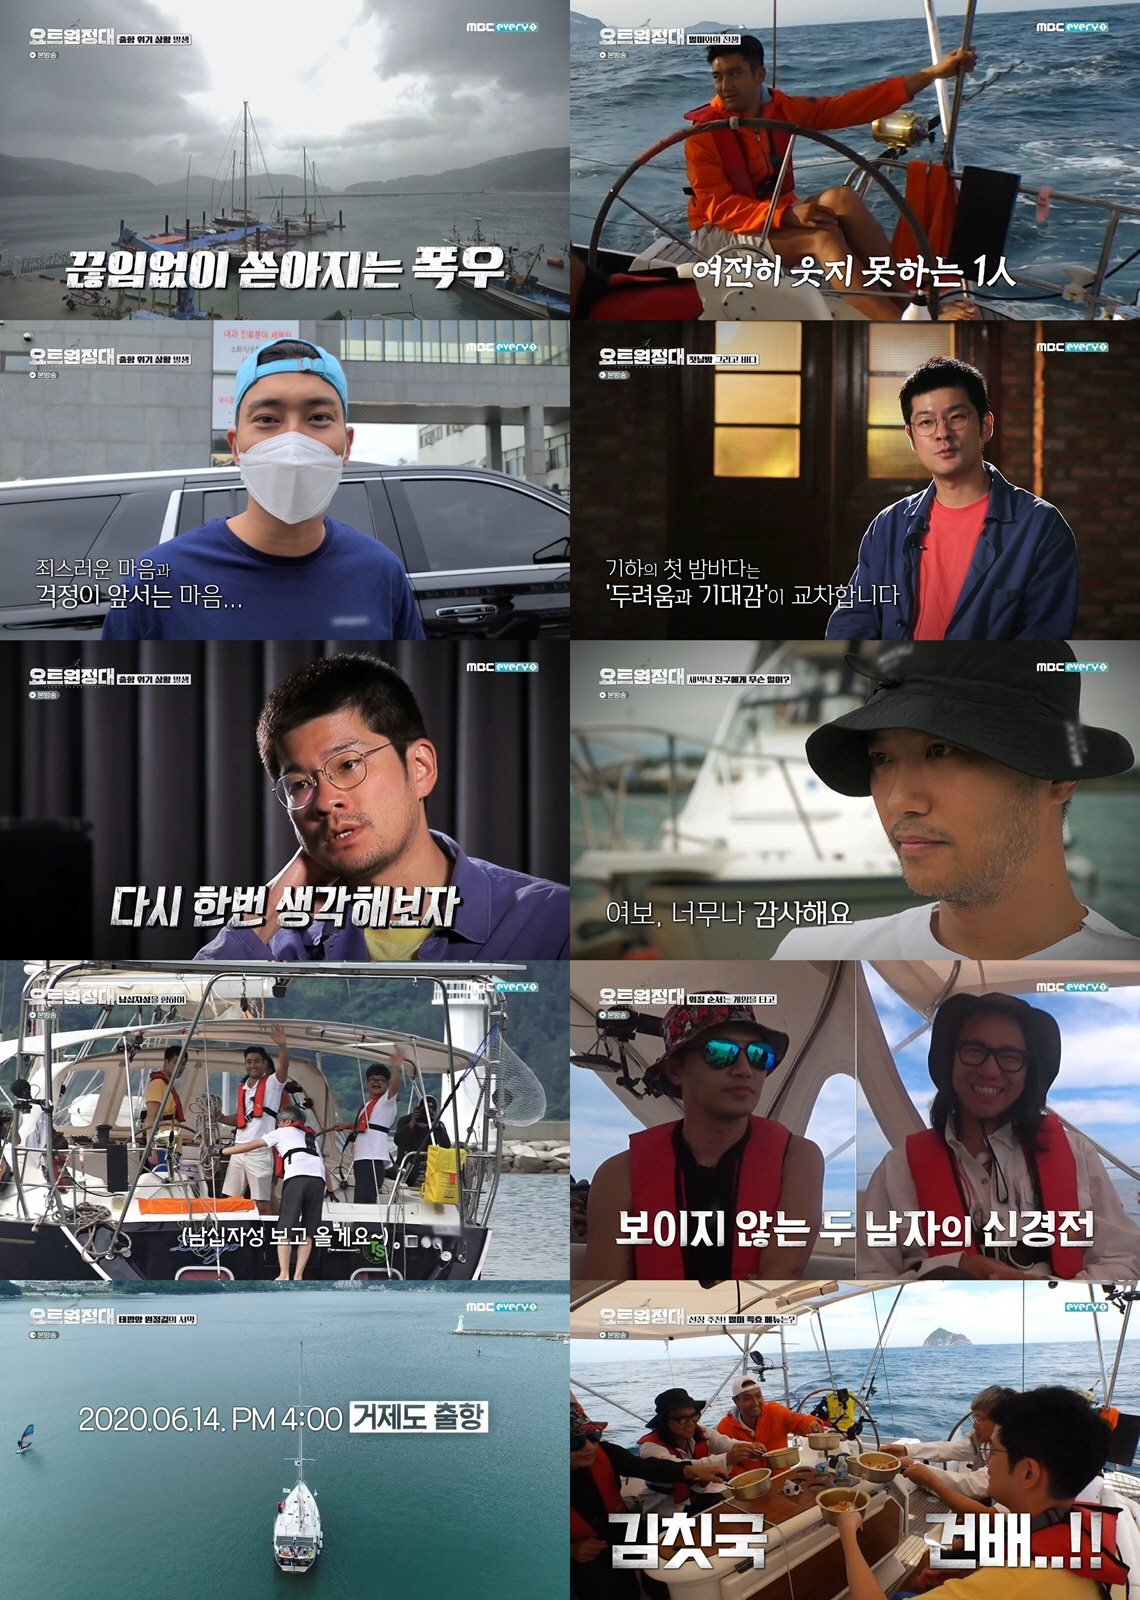 Jin Goo, Choi Siwon, Chang Kiha and Song Ho-joon of MBC Everlon Yot Expedition finally made The Embarkation for Cythera.In the Yot Expedition broadcast on the 24th, the story of the Yot Expedition Crewe, which succeeded in the Embarkation for Cythera, was finally revealed after overcoming the bad conditions of weather deterioration such as strong winds and heavy rains and Choi Siwons hospital trip.The Embarkation for Cythera was so powerful that the power of Mother Nature was powerful. Nevertheless, the Yot Expedition Crewe somehow adapted.The Embarkation for Cythera D-DAY, which finally welcomed, but the weather did not follow.With record heavy rains, strong winds that made it difficult for people to stand properly were pushed into Geoje Island, where Choi Siwon, the youngest, went to the hospital with severe urticaria.In addition, Jin Goo and other Crewes were all anxious because of the words a place like the Bermuda Triangle and passing the path of the typhoon heard from Captain Kim Seung-jin the day before.Eventually, the day after the scheduled date, Yot Expedition was able to do The Embarkation for Cythera.Finally, as the Embarkation for Cythera, the four Crewes all put themselves on the yacht with a positive mindset.But as we moved on, another Danger came, more waves than we thought, and Crewe, who had the aura of motion sickness, was the youngest Choi Siwon.Choi Siwon, who did not get sick at the time of the Embarkation for Cythera, was so surprised that I was very surprised.Choi Siwon suffered from previous-class motion sickness; Crewes continued to care for the condition of their youngest Choi Siwon and were saddened by the seldom getting better.Nevertheless, Choi Siwon also tried to have a conversation with Crewe without any hesitation, while eating Chungmu Kimbap, which Jin Goo had taken in advance, to overcome his own motion sickness.So a day passed in Danger, and Crewes arranged the game to play a kind of inviolable watching.Each watcher spent the first night at a set time, Crewes spending their first night at sea, Song Ho-jun impressed, Chang Kiha felt anticipation and fear.Choi Siwon spoke to her mother.The most clunky first night of the four-man Crewe was Jin Goo, who missed the cabin with a family photo, and saw the first sunrise of his life while watching.Then I made a video call to my wife, Jin Goo, who saw her crying wife at 4 am and children shouting I love you dad.It was a moment of impression that the love of Jin Goos family, Jin Goo, which was My family is proud and everything, felt the love of the family toward Jin Goo.The Embarkation for Cythera was finally in Danger, fear of sailing was heavy, motion sickness came, and longing for the family shook my heart.However, the Yot Expedition Crewes adapted to their best, and the characters and characters of Crewes, which were gradually revealed as they spent time together, caused laughter.